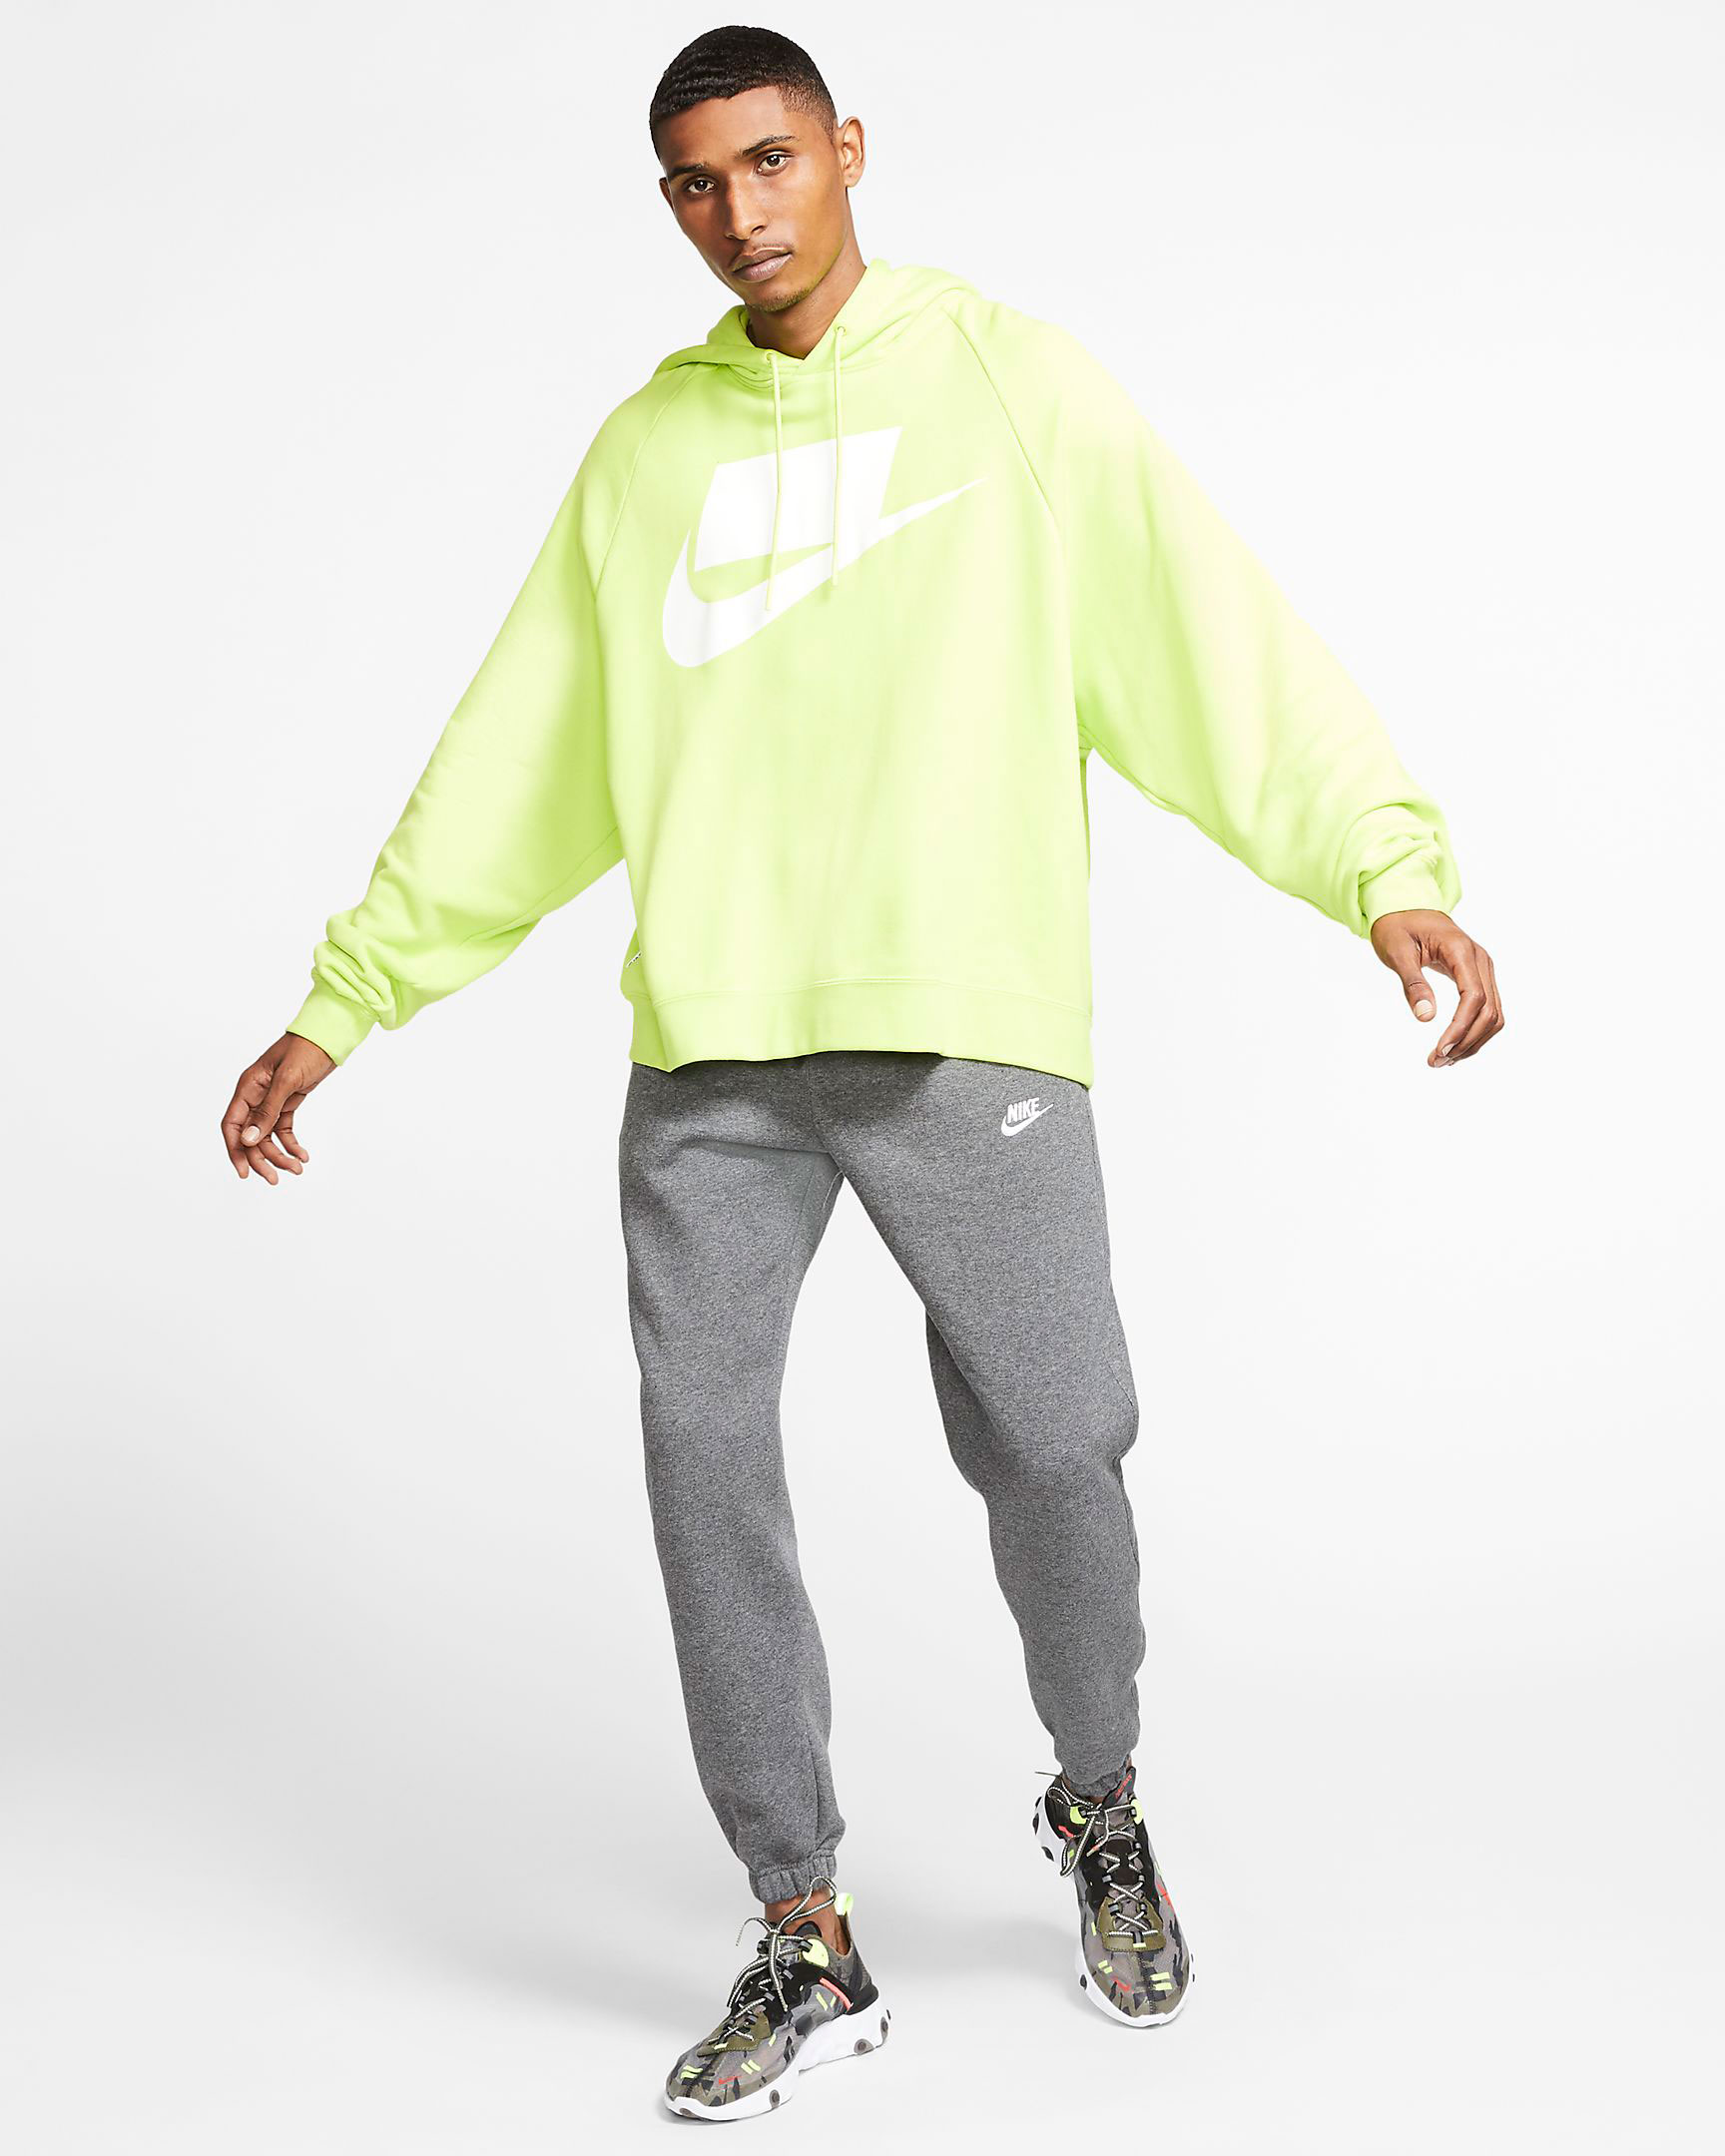 nike-air-max-95-neon-yellow-volt-grey-hoodie-pants-outfit